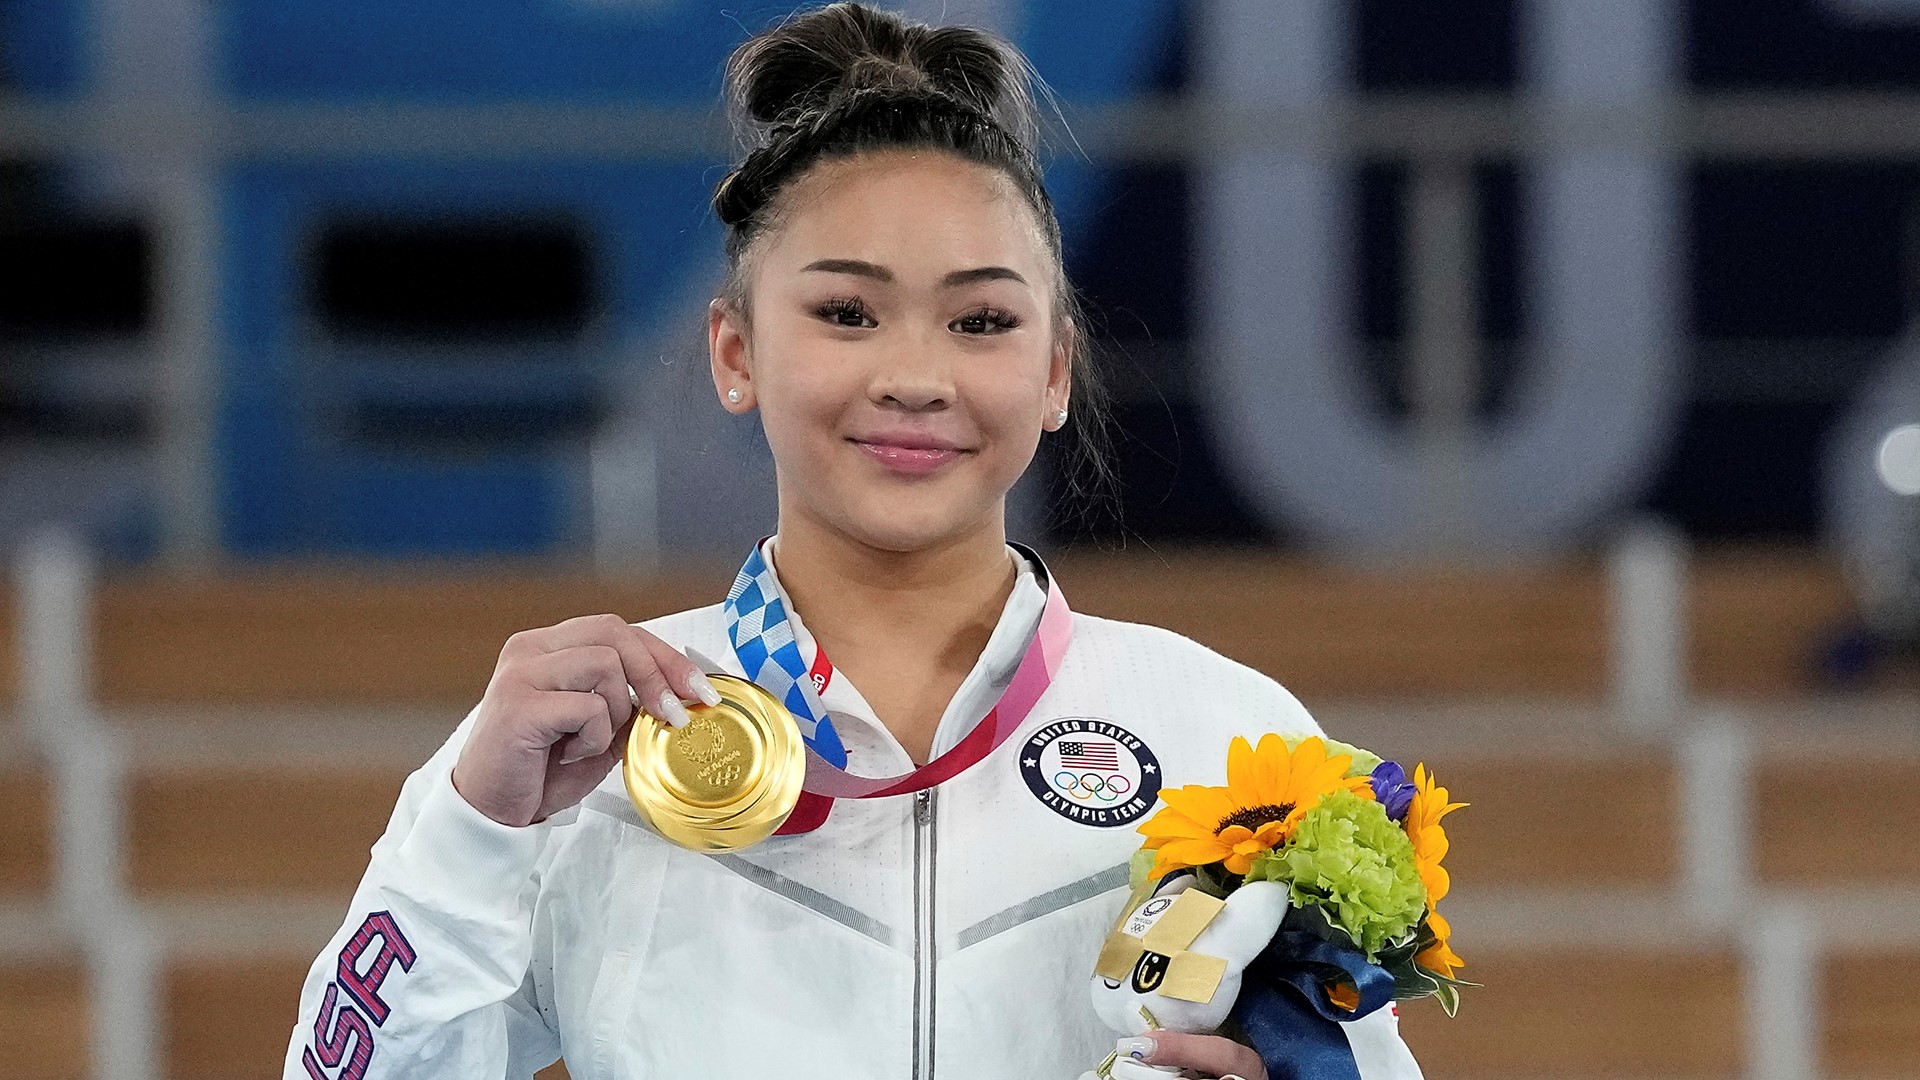 Why Sunisa Lee's gold medal matters to a HmongAmerican woman